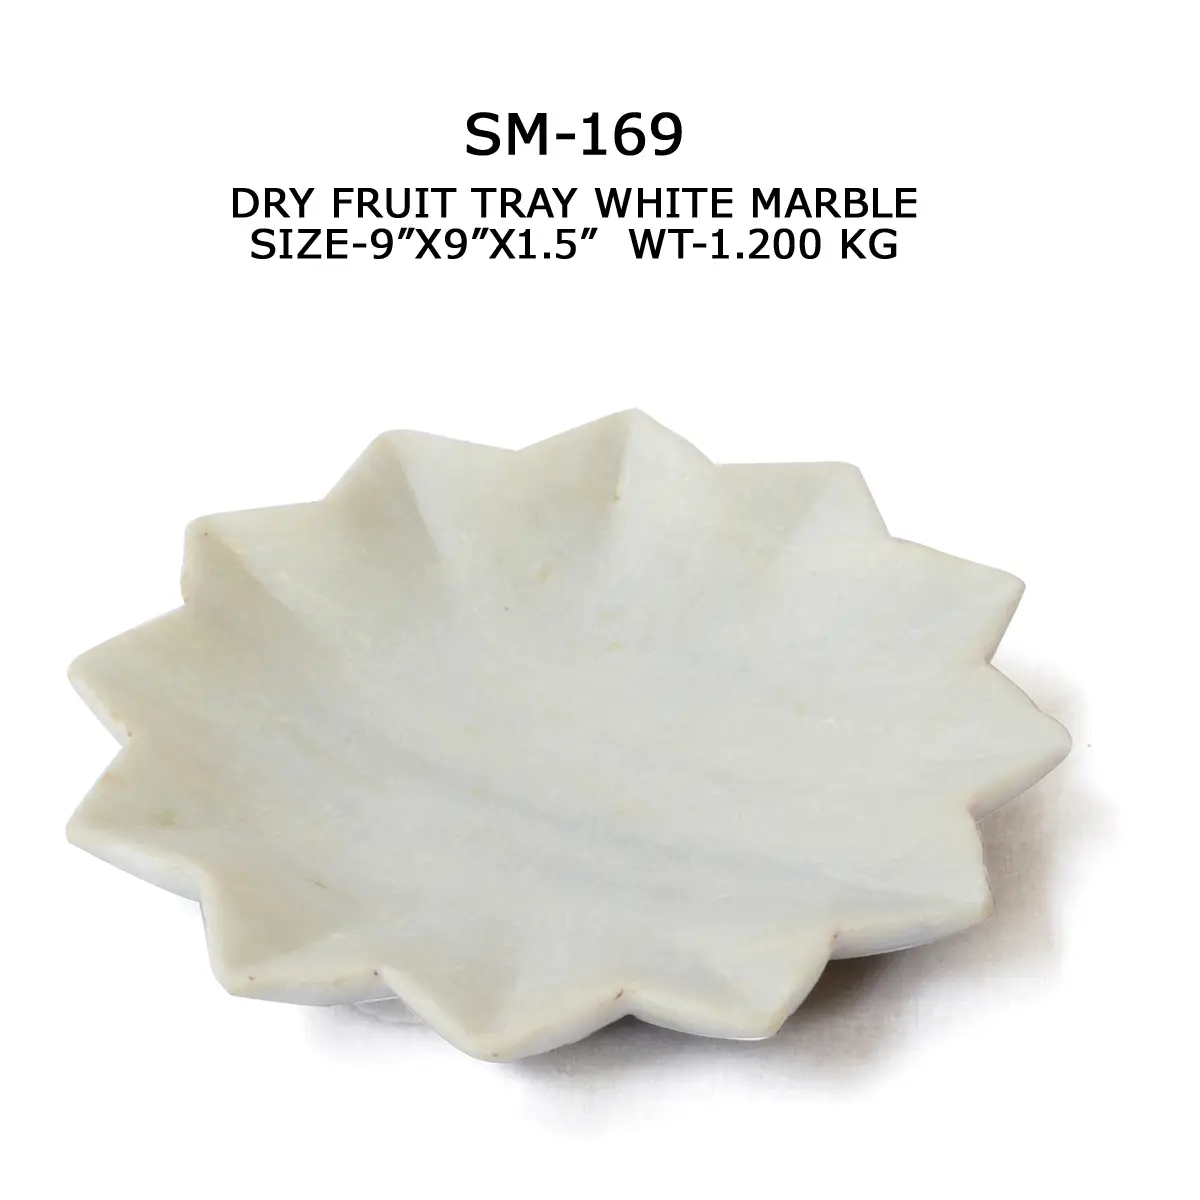 DRY FRIUT TRAY WHITE MARBLE